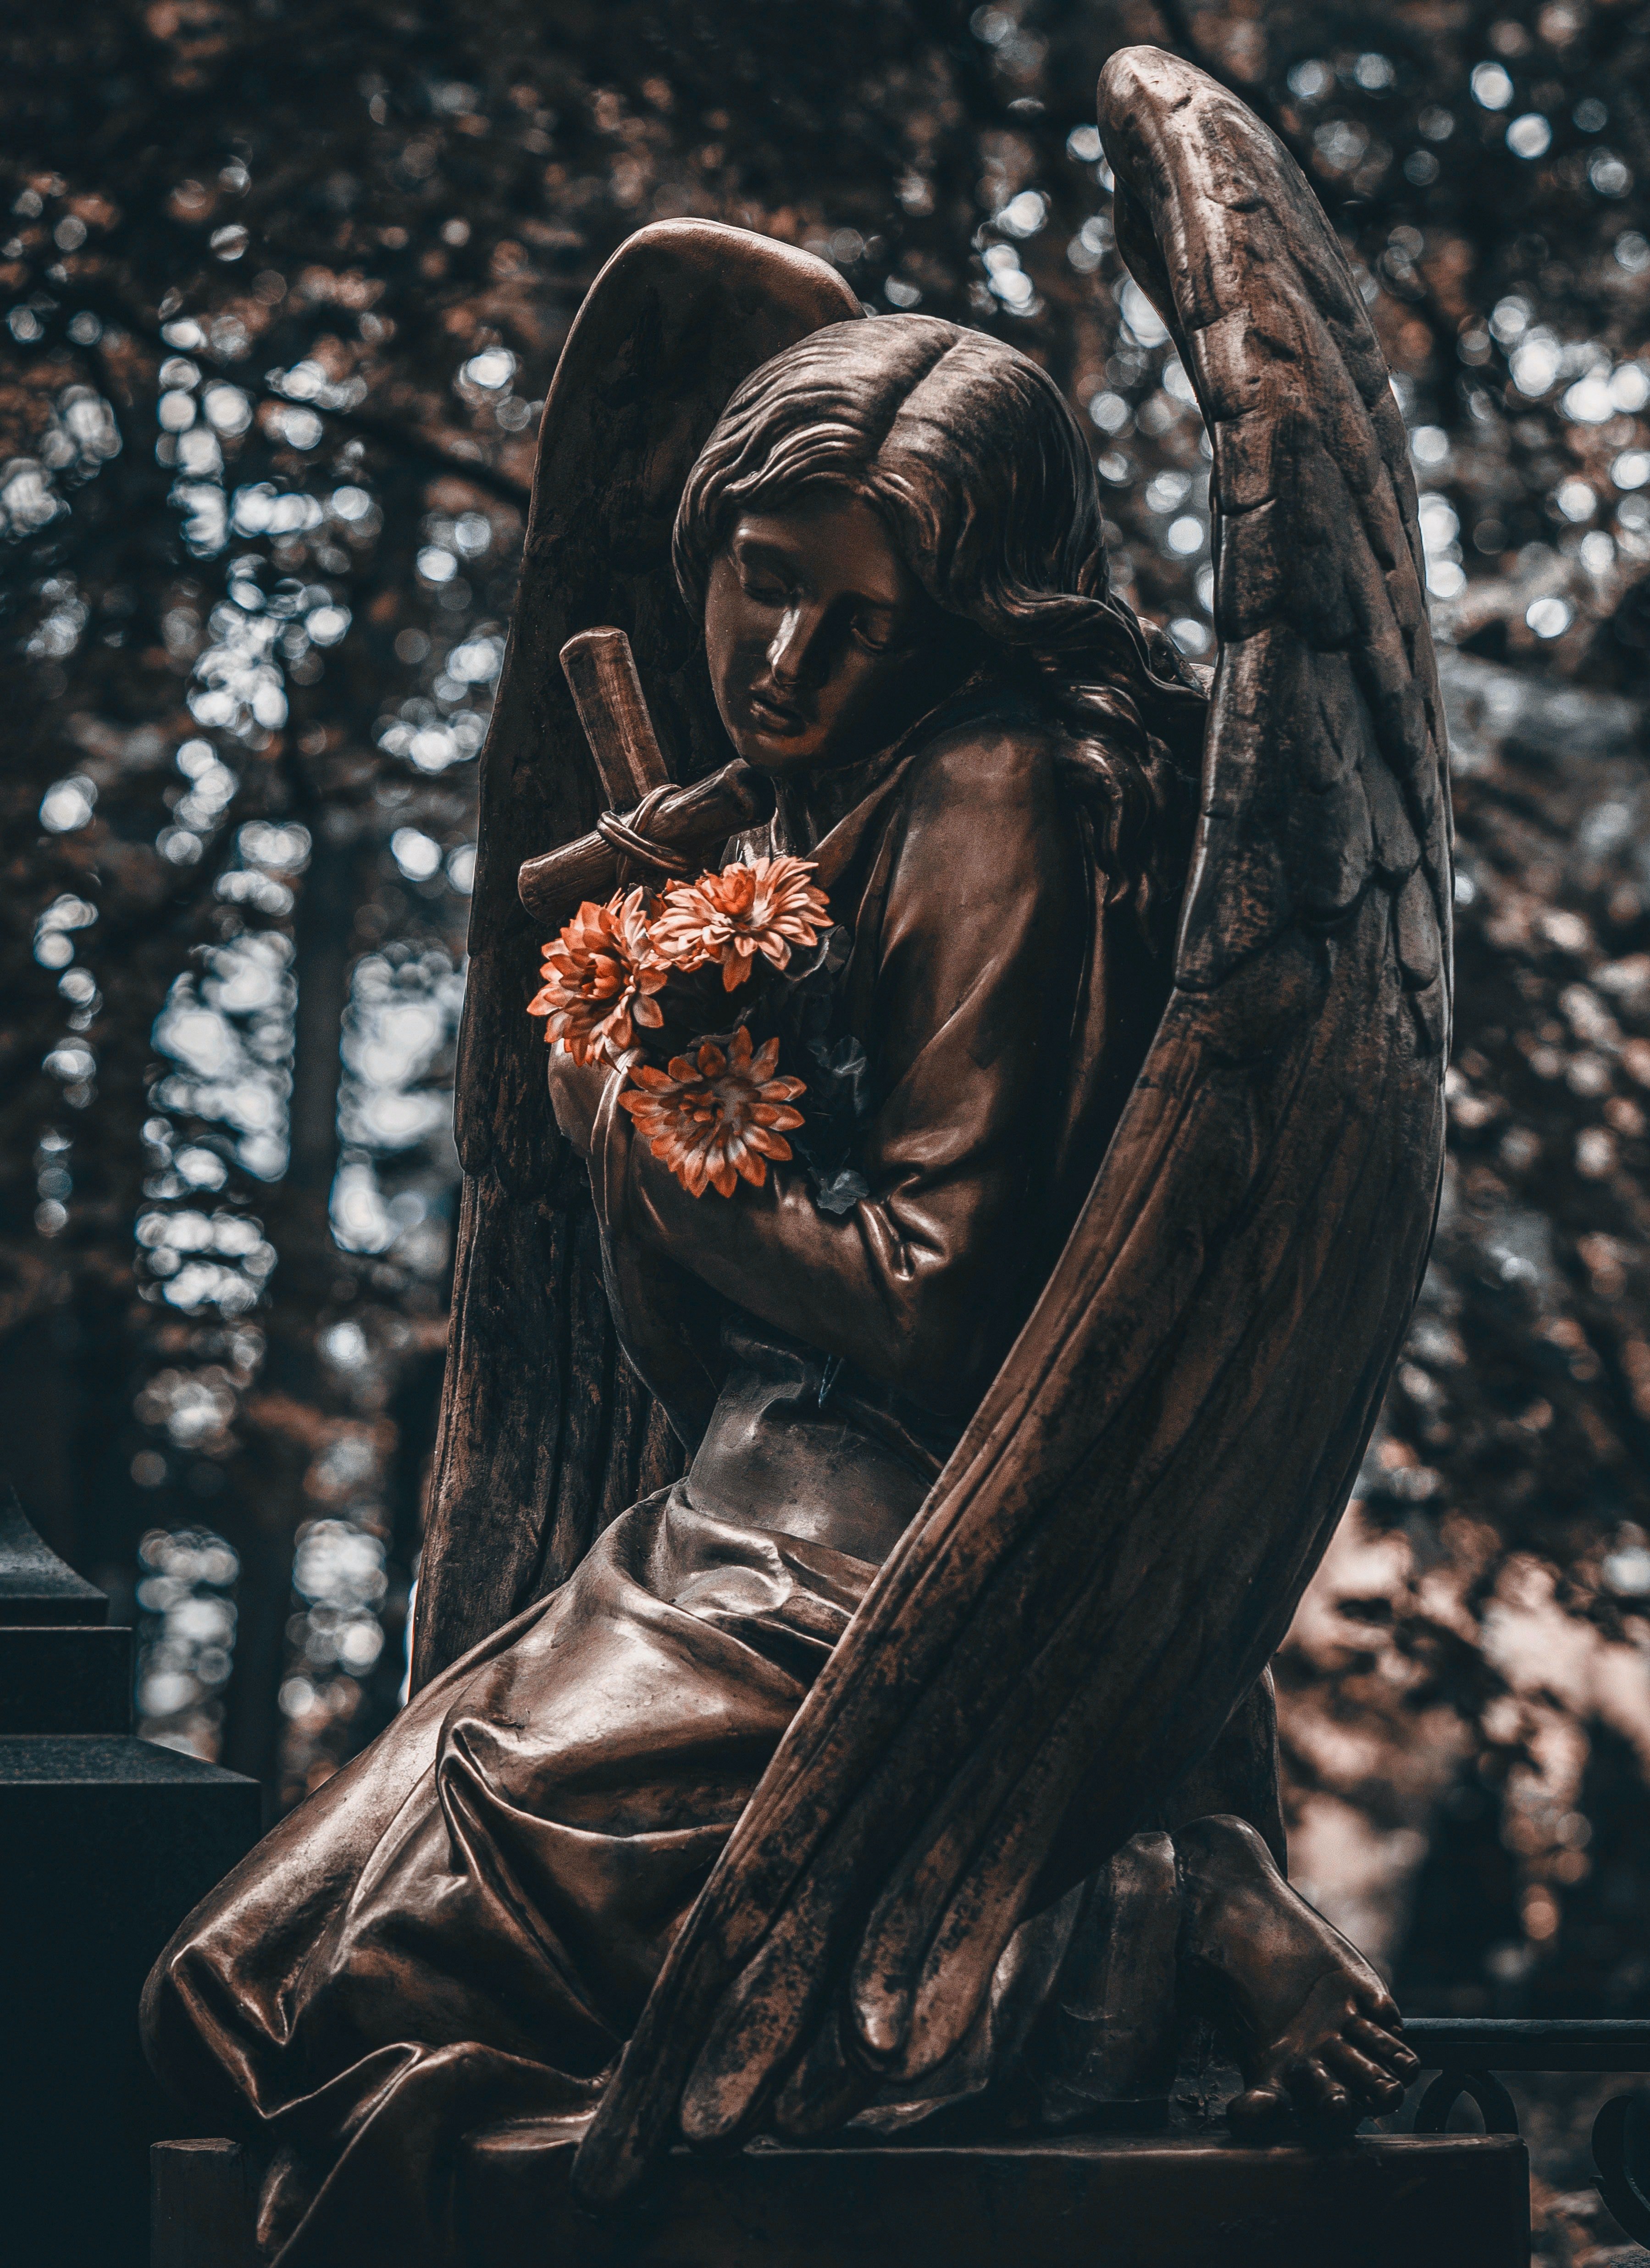 Molly died in peace knowing her daughter wasn't alone. | Source: Unsplash